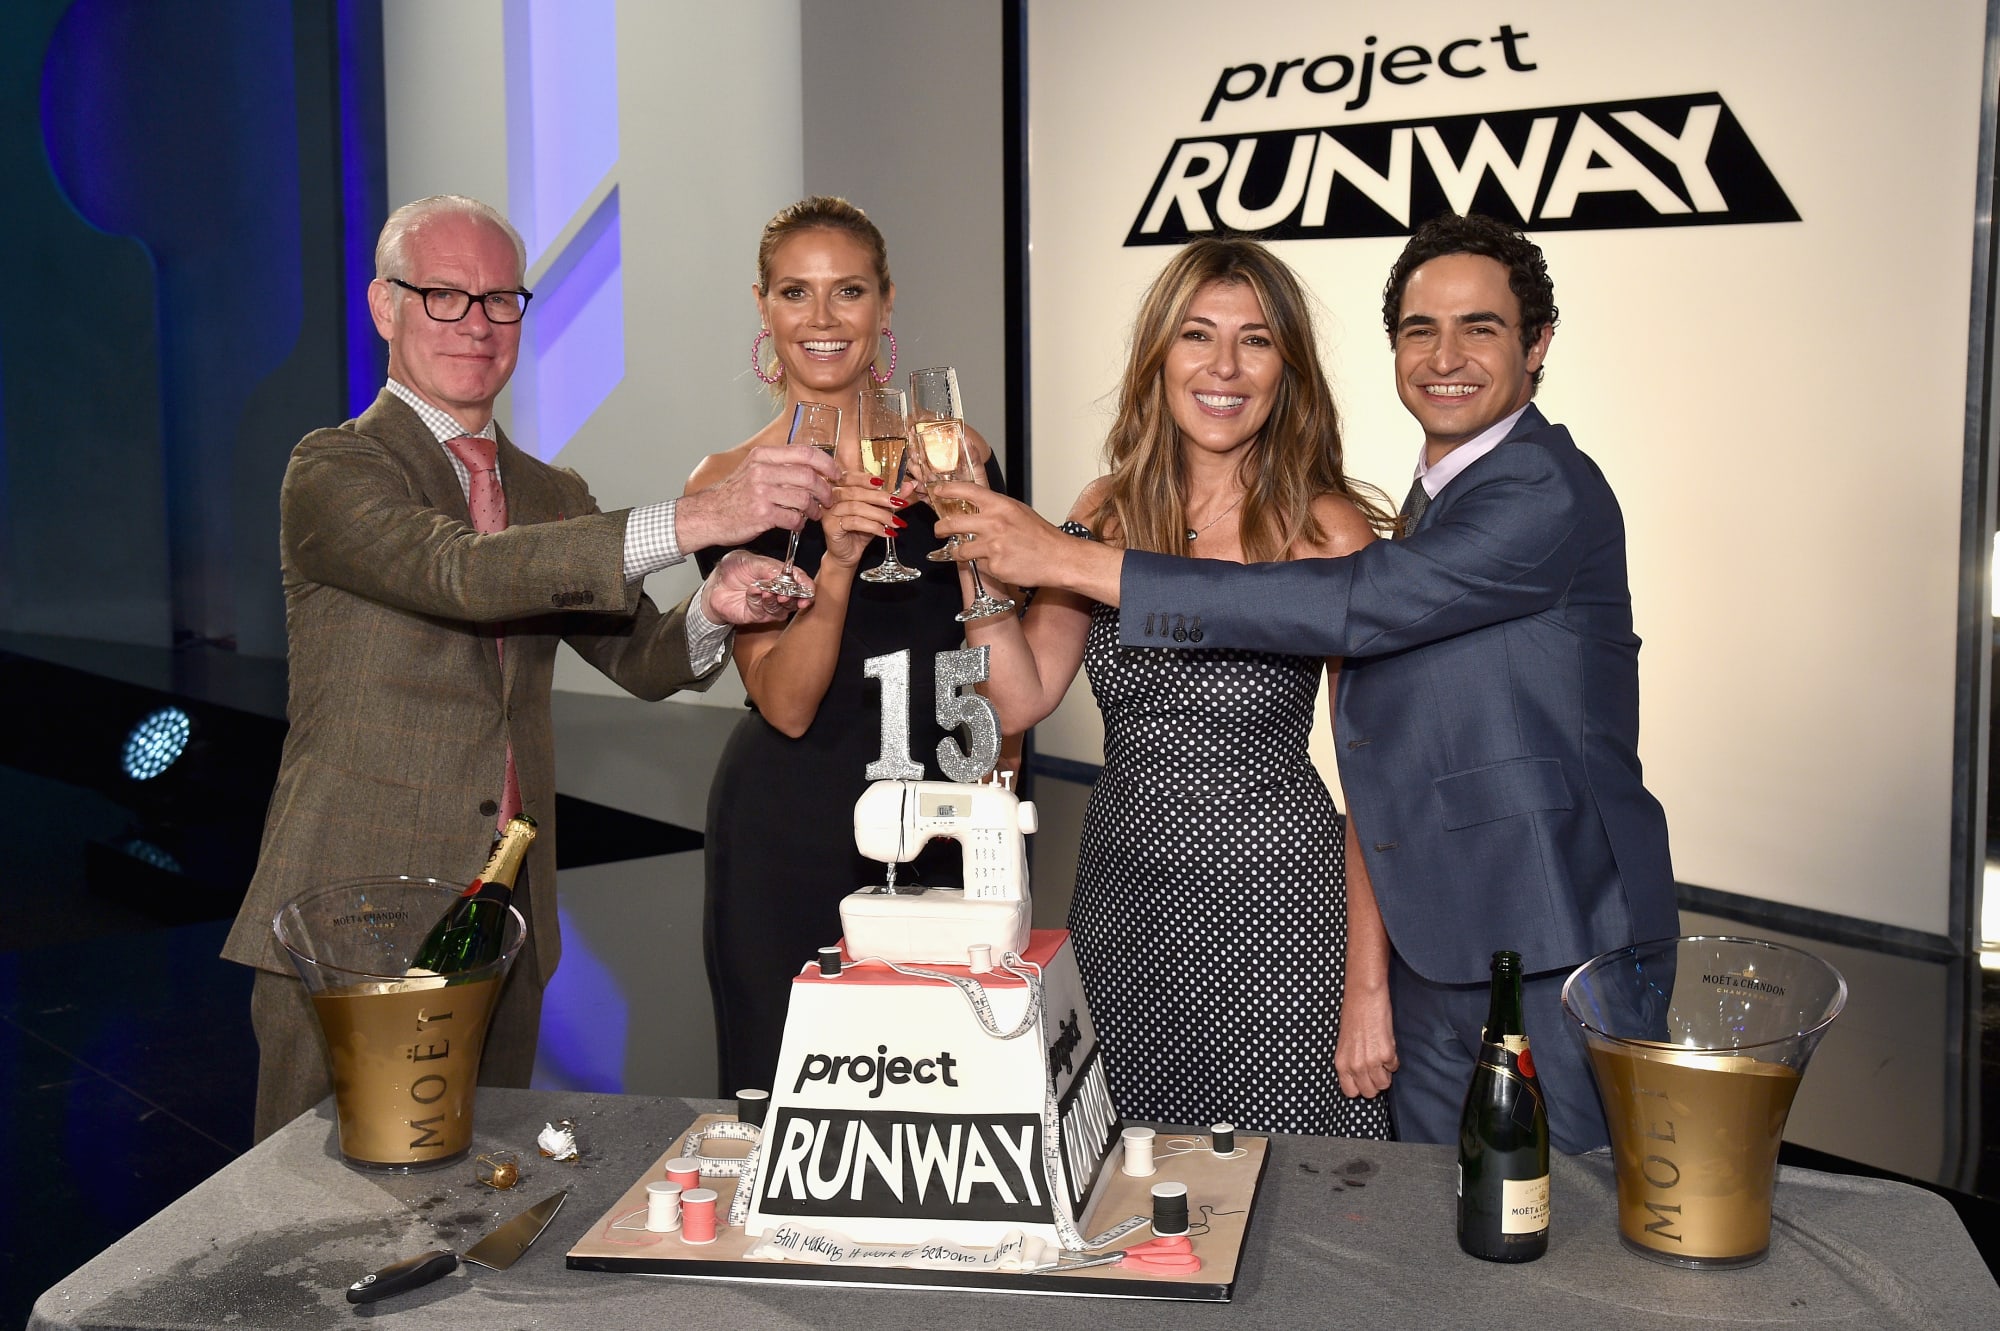 who went home on project runway season 15 episode 7